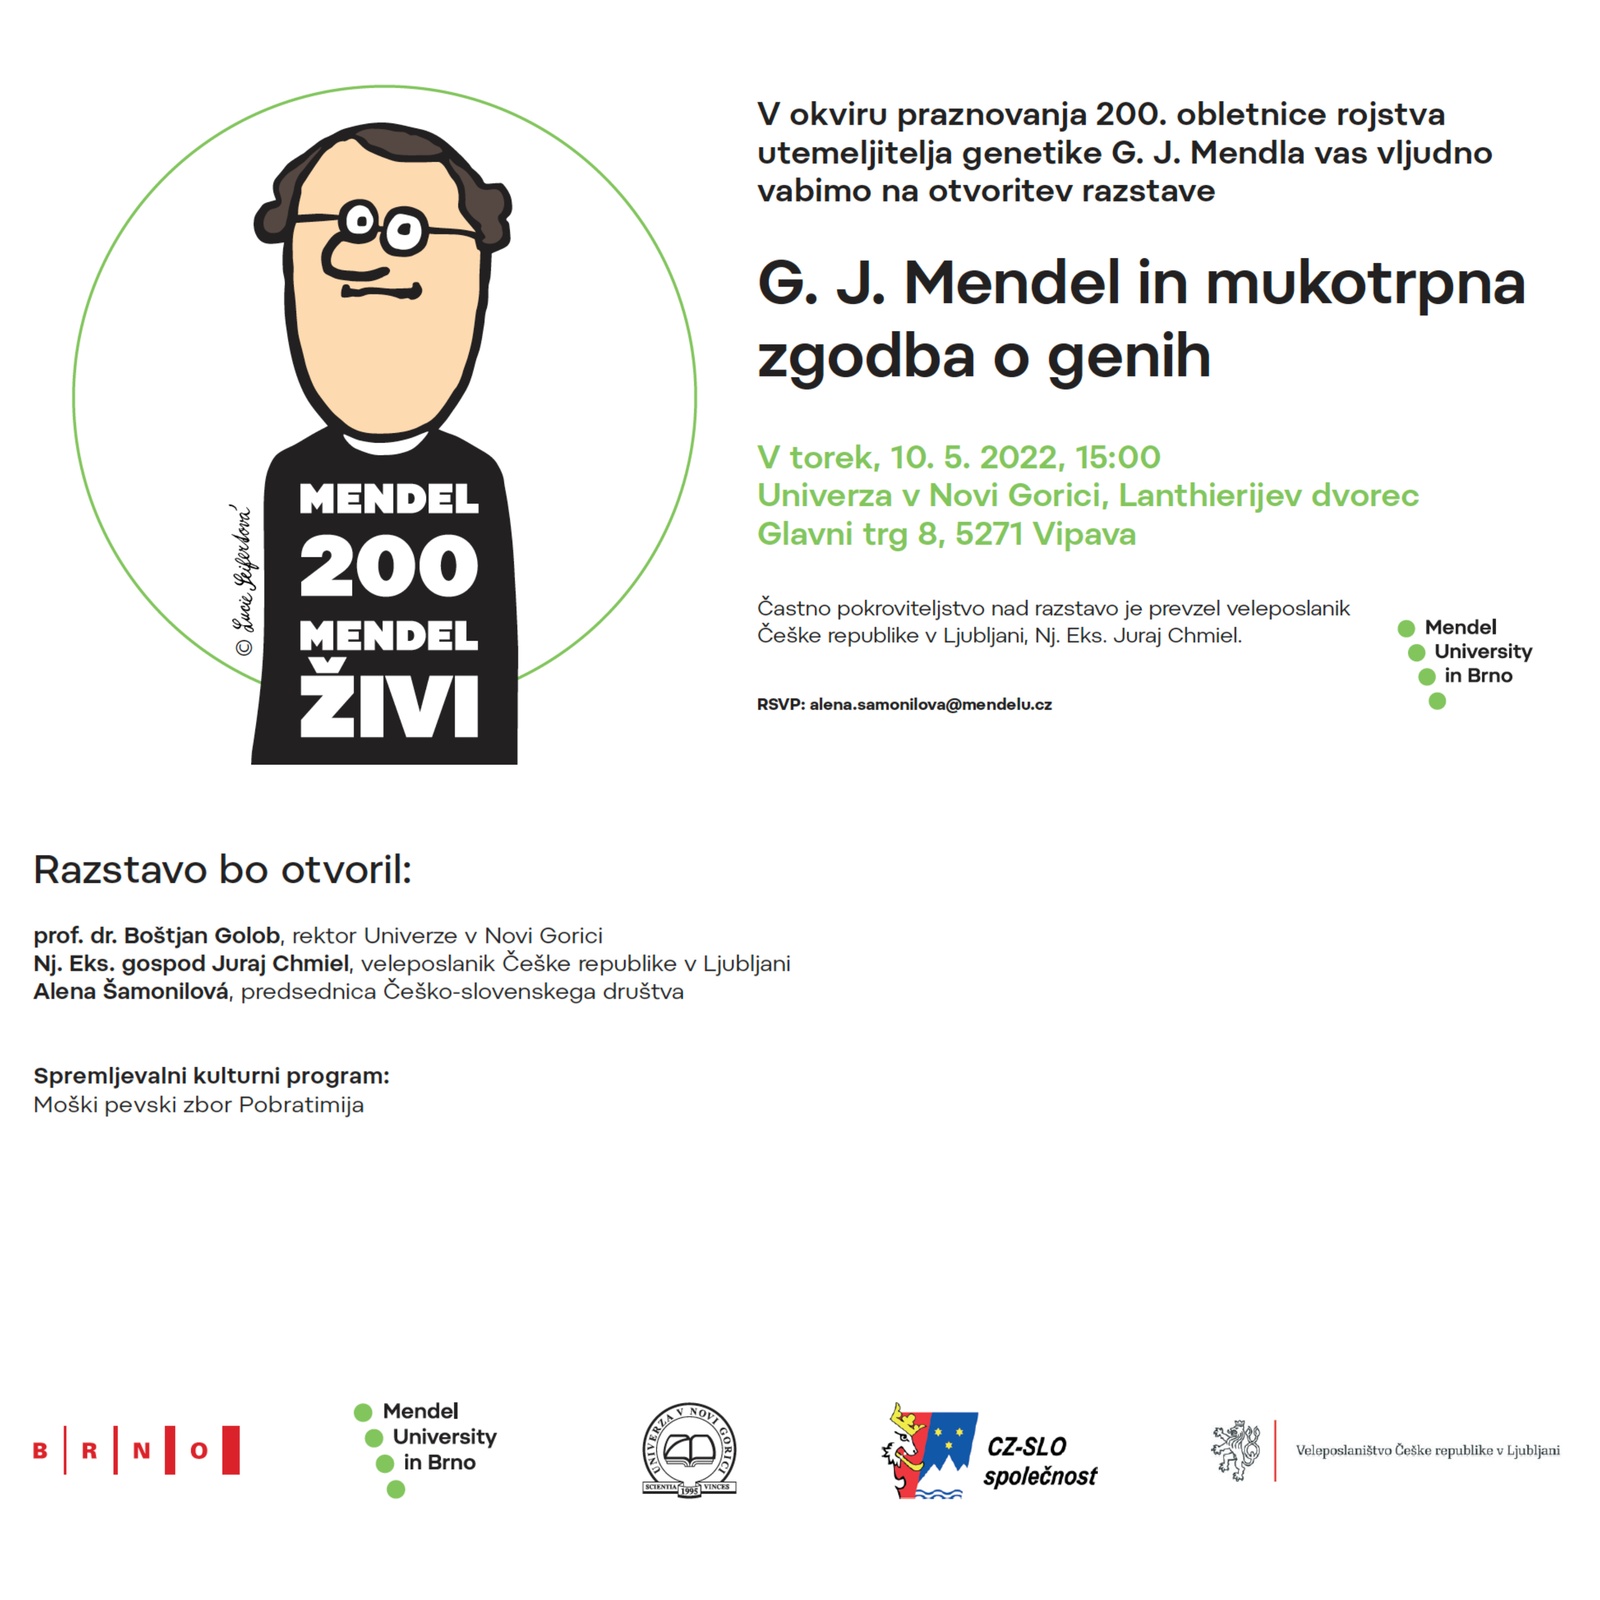 Invitation to attend the opening of the exhibition of G. J. Mendel and the painful story about genes